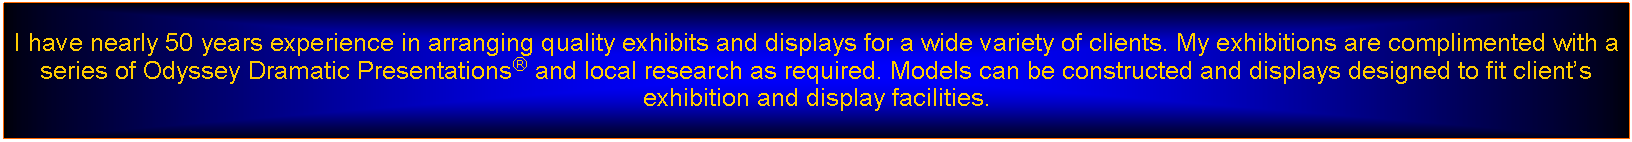 Text Box: I have nearly 50 years experience in arranging quality exhibits and displays for a wide variety of clients. My exhibitions are complimented with a series of Odyssey Dramatic Presentations and local research as required. Models can be constructed and displays designed to fit clients exhibition and display facilities.